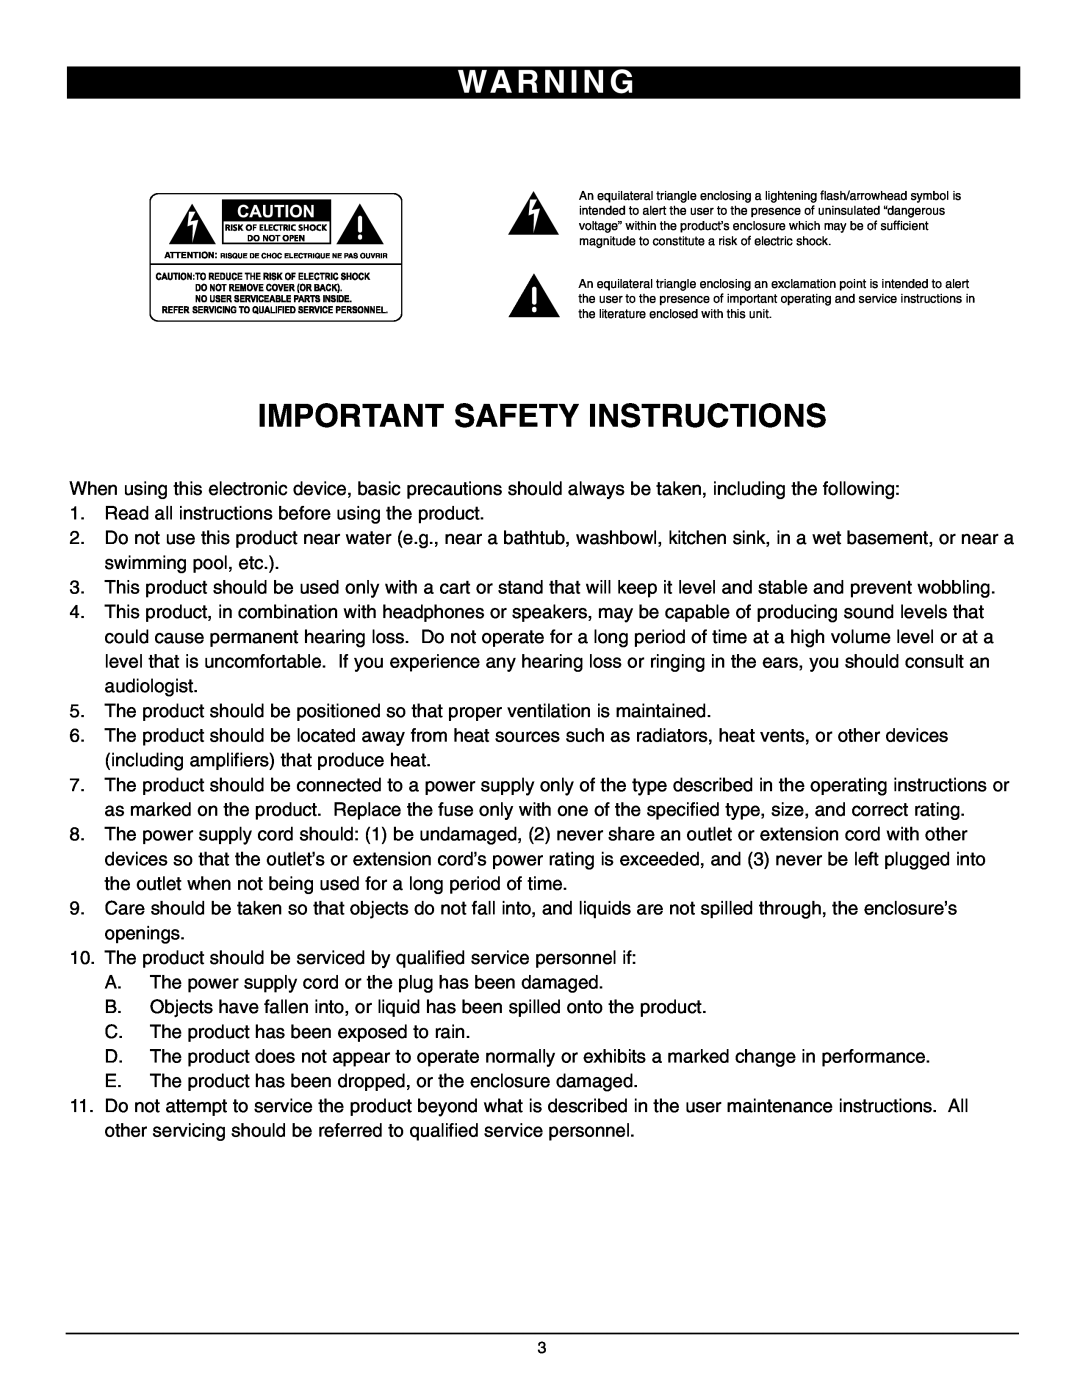 Nady Systems PMX-1600 16, PMX-600 6 owner manual Wa R N I N G, Important Safety Instructions 